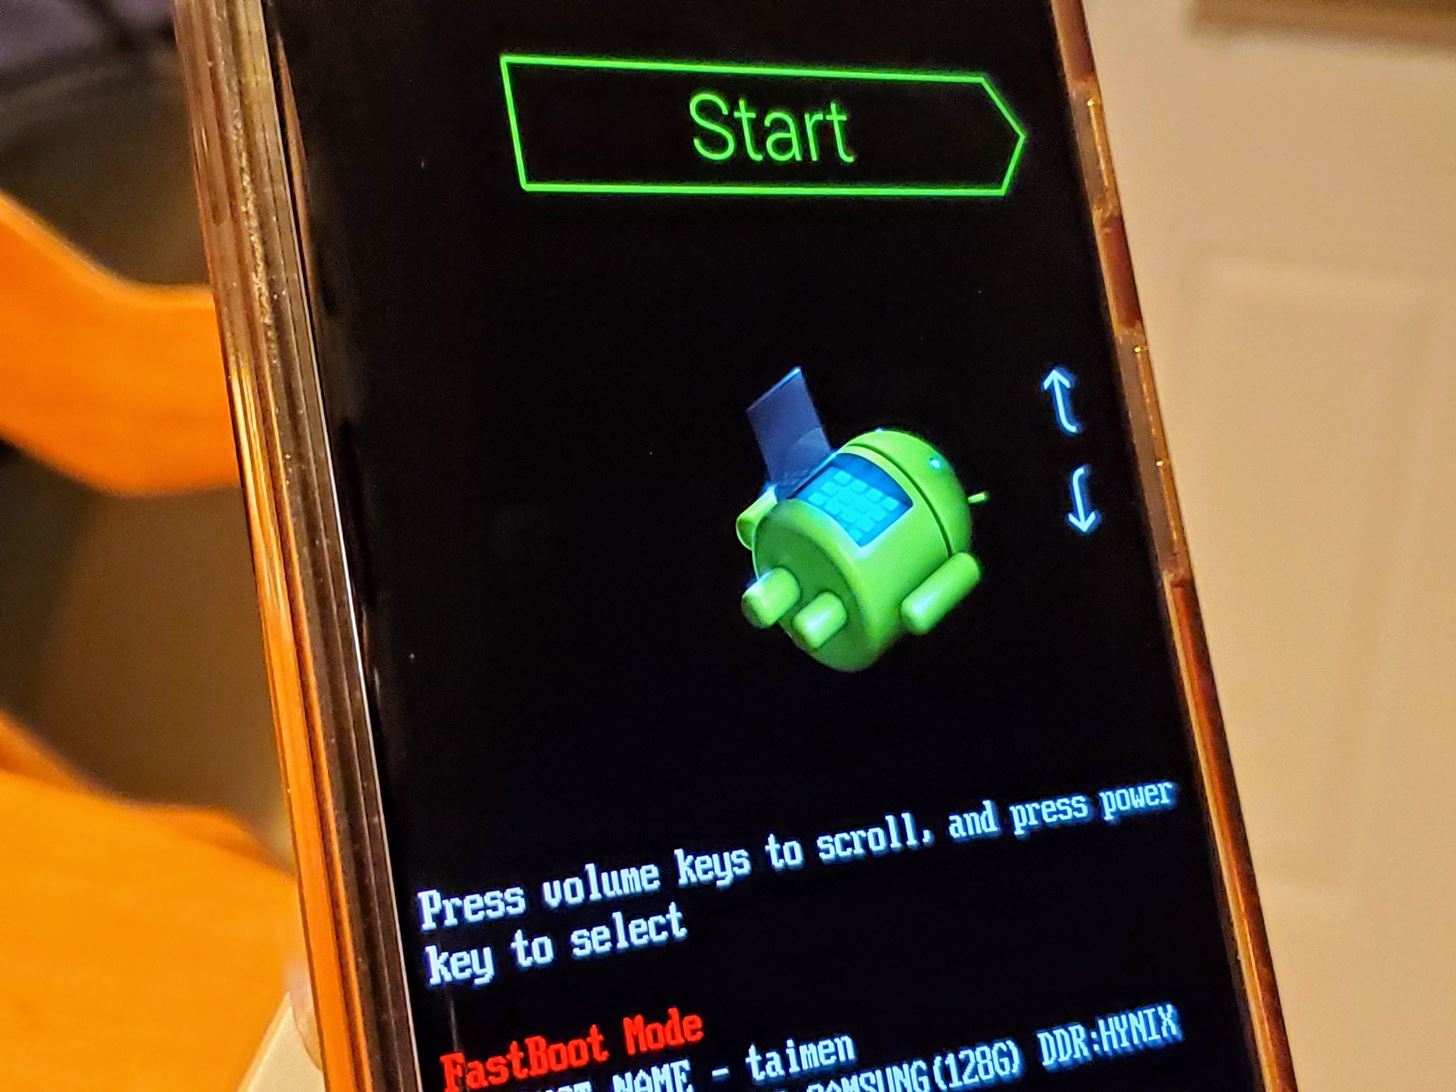 How to Install Android Q Beta on Any Project Treble Phone